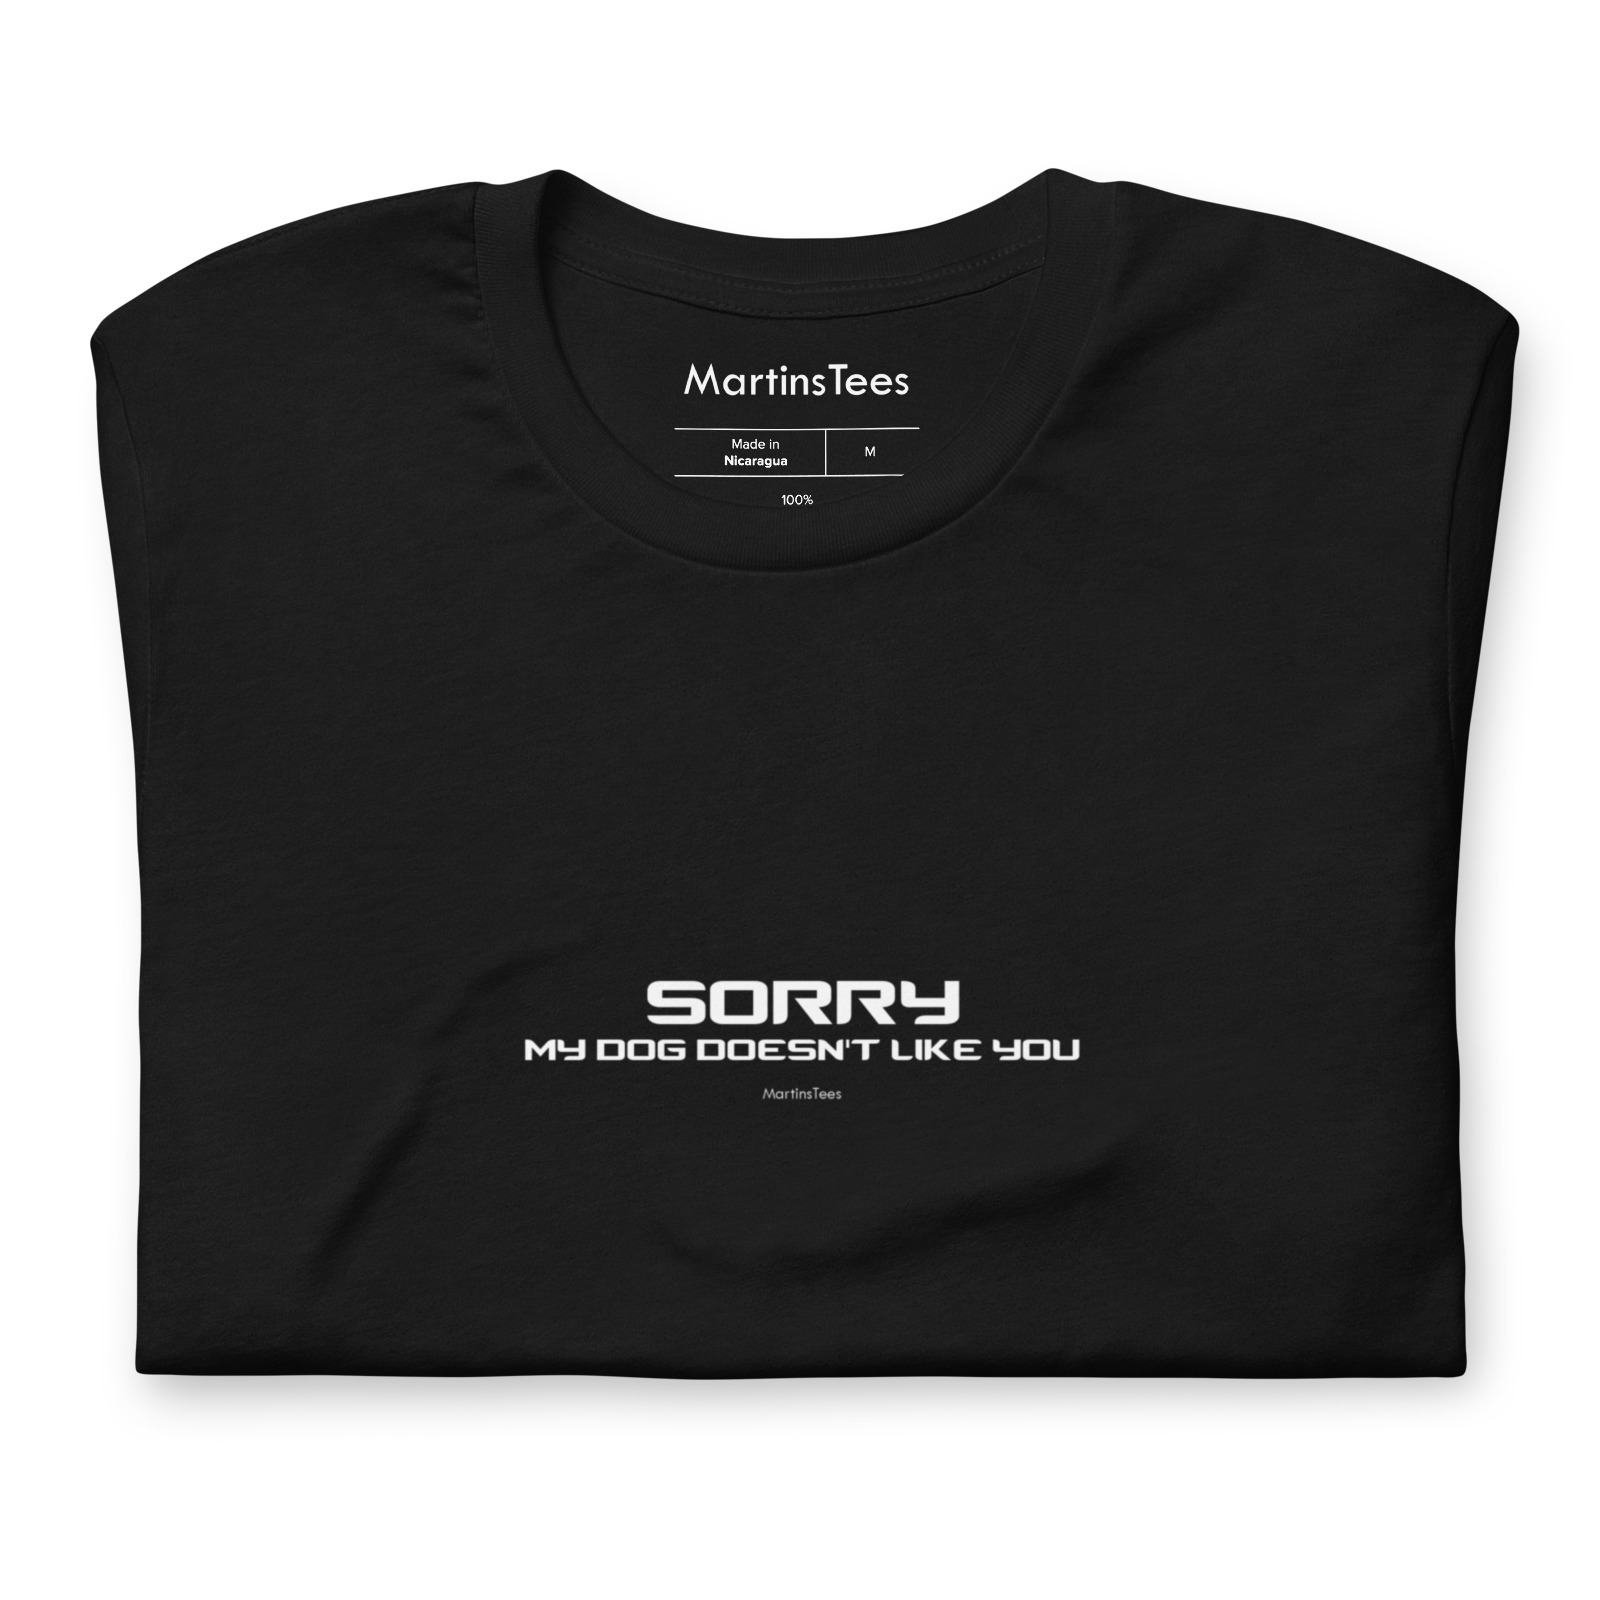 T-shirt: SORRY - MY DOG DOESN'T LIKE YOU